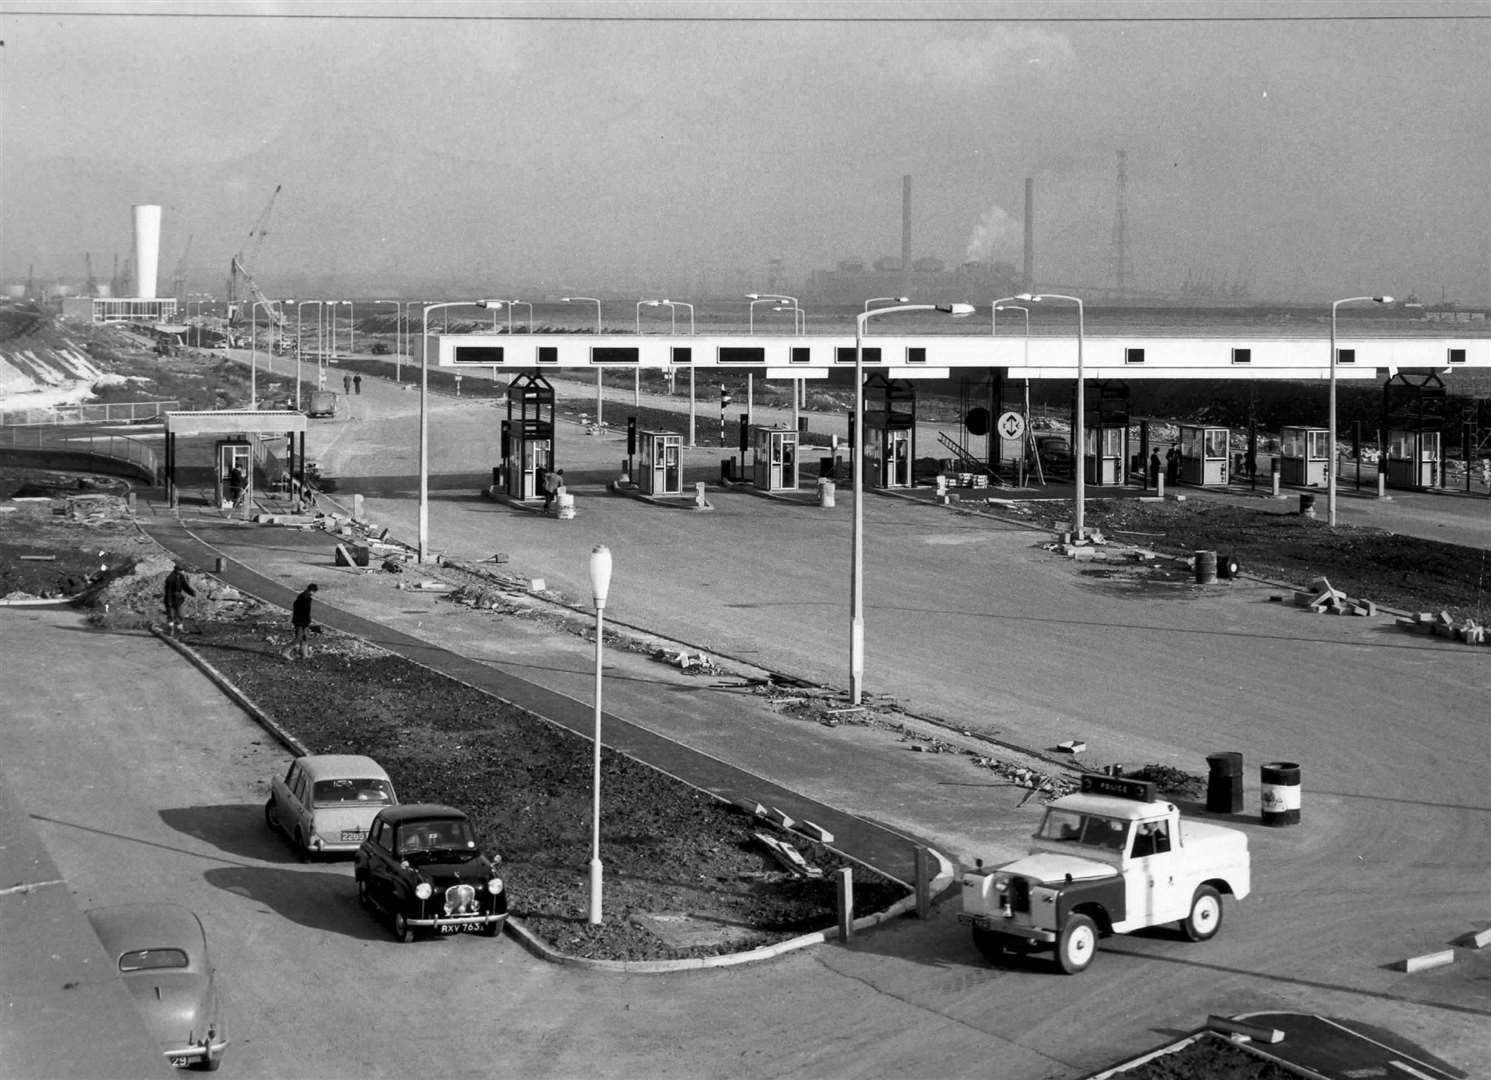 Construction of toll booths being completed at Dartford Tunnel. November 16 1963